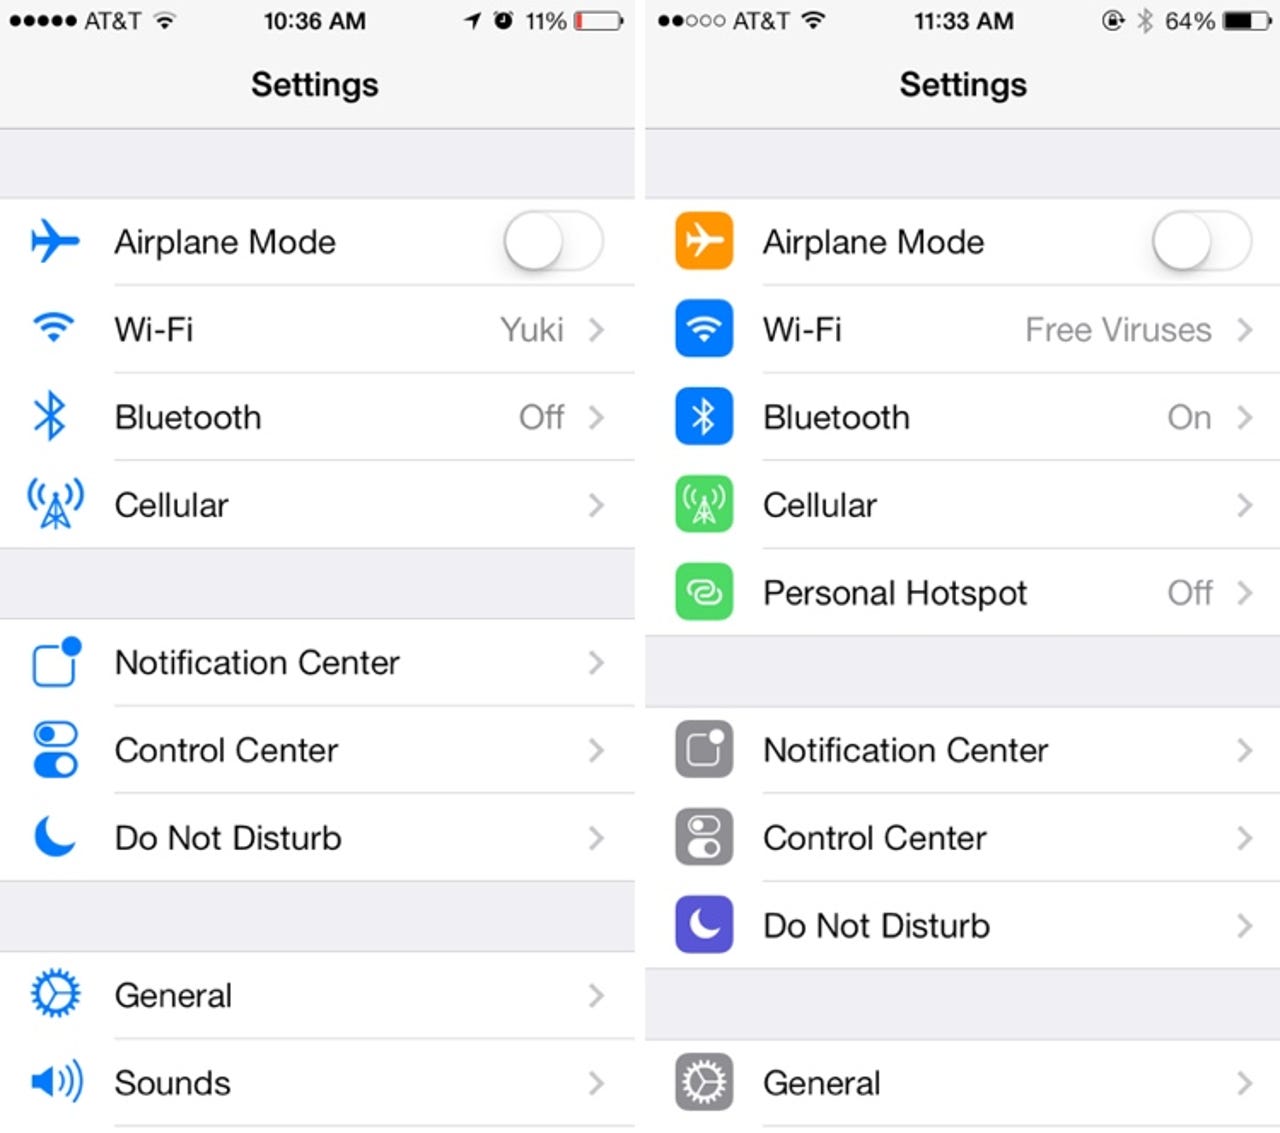 iOS 7 beta drops with revamped Settings, Control Center and Messages - Jason O'Grady